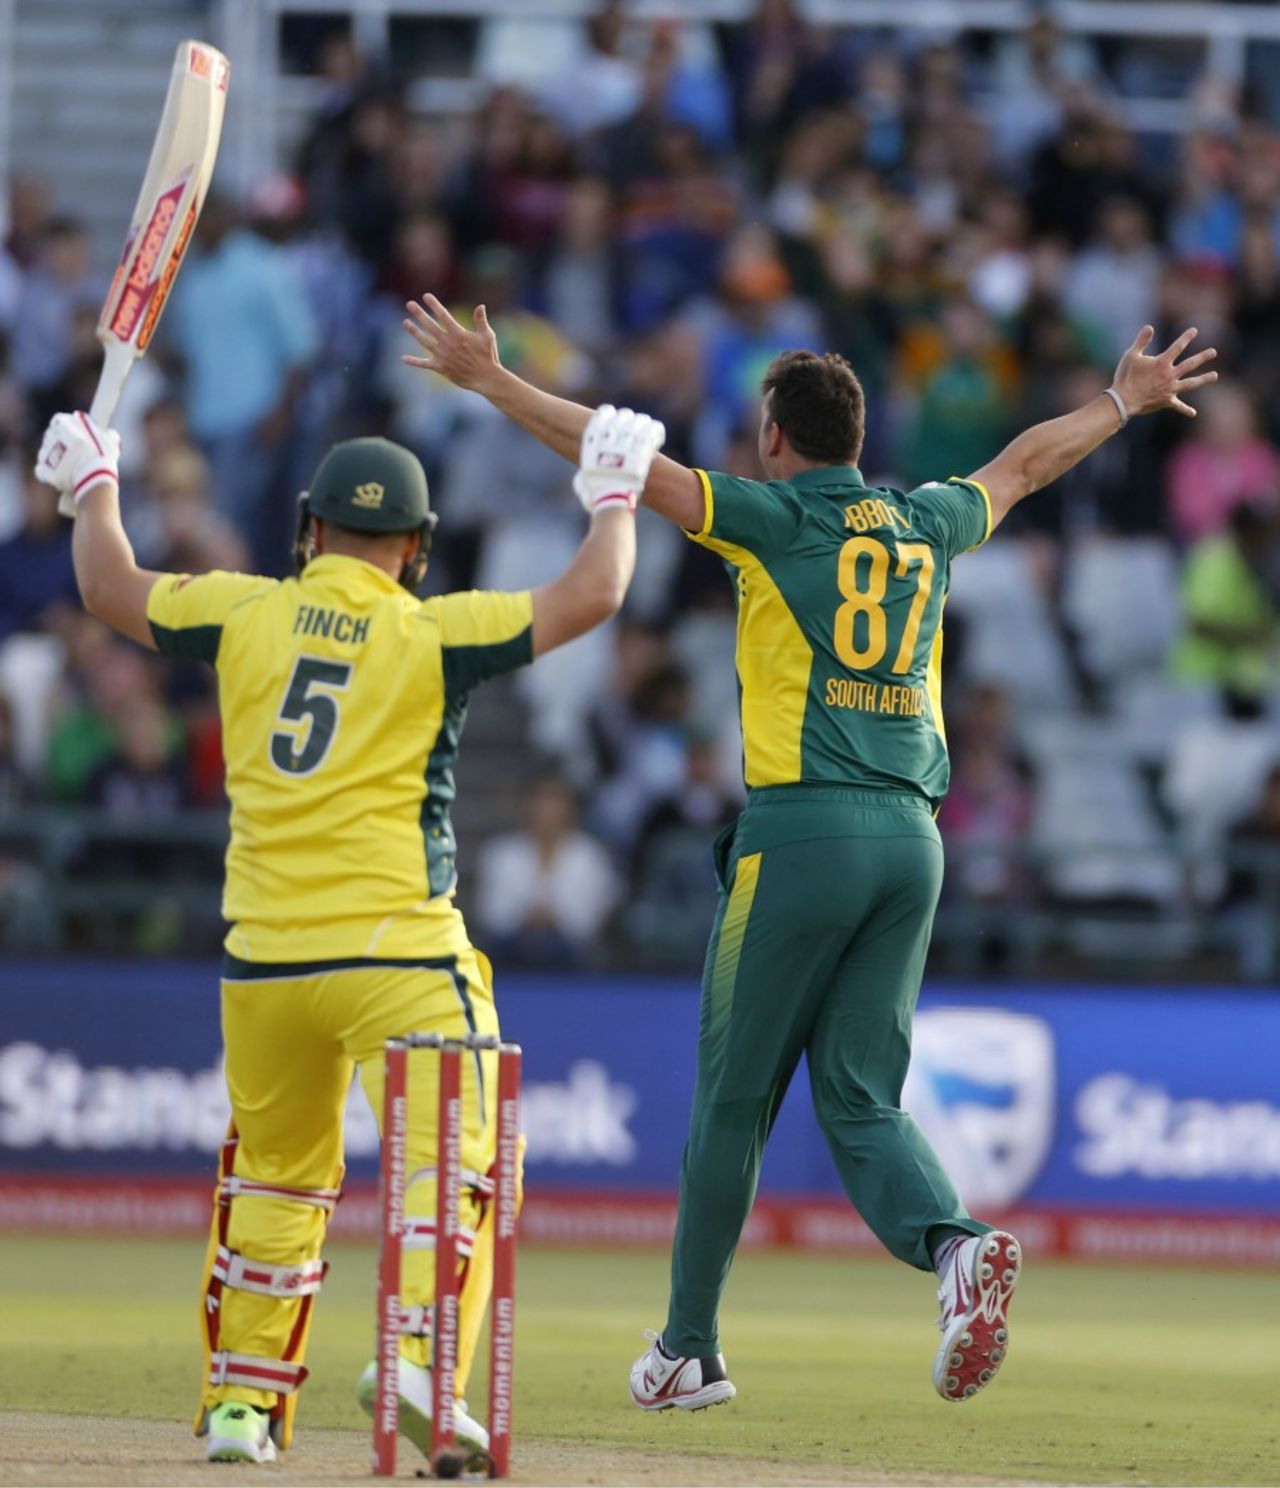 Kyle Abbott goes up in appeal for Aaron Finch's wicket, South Africa v Australia, 5th ODI, Cape Town, October 12, 2016